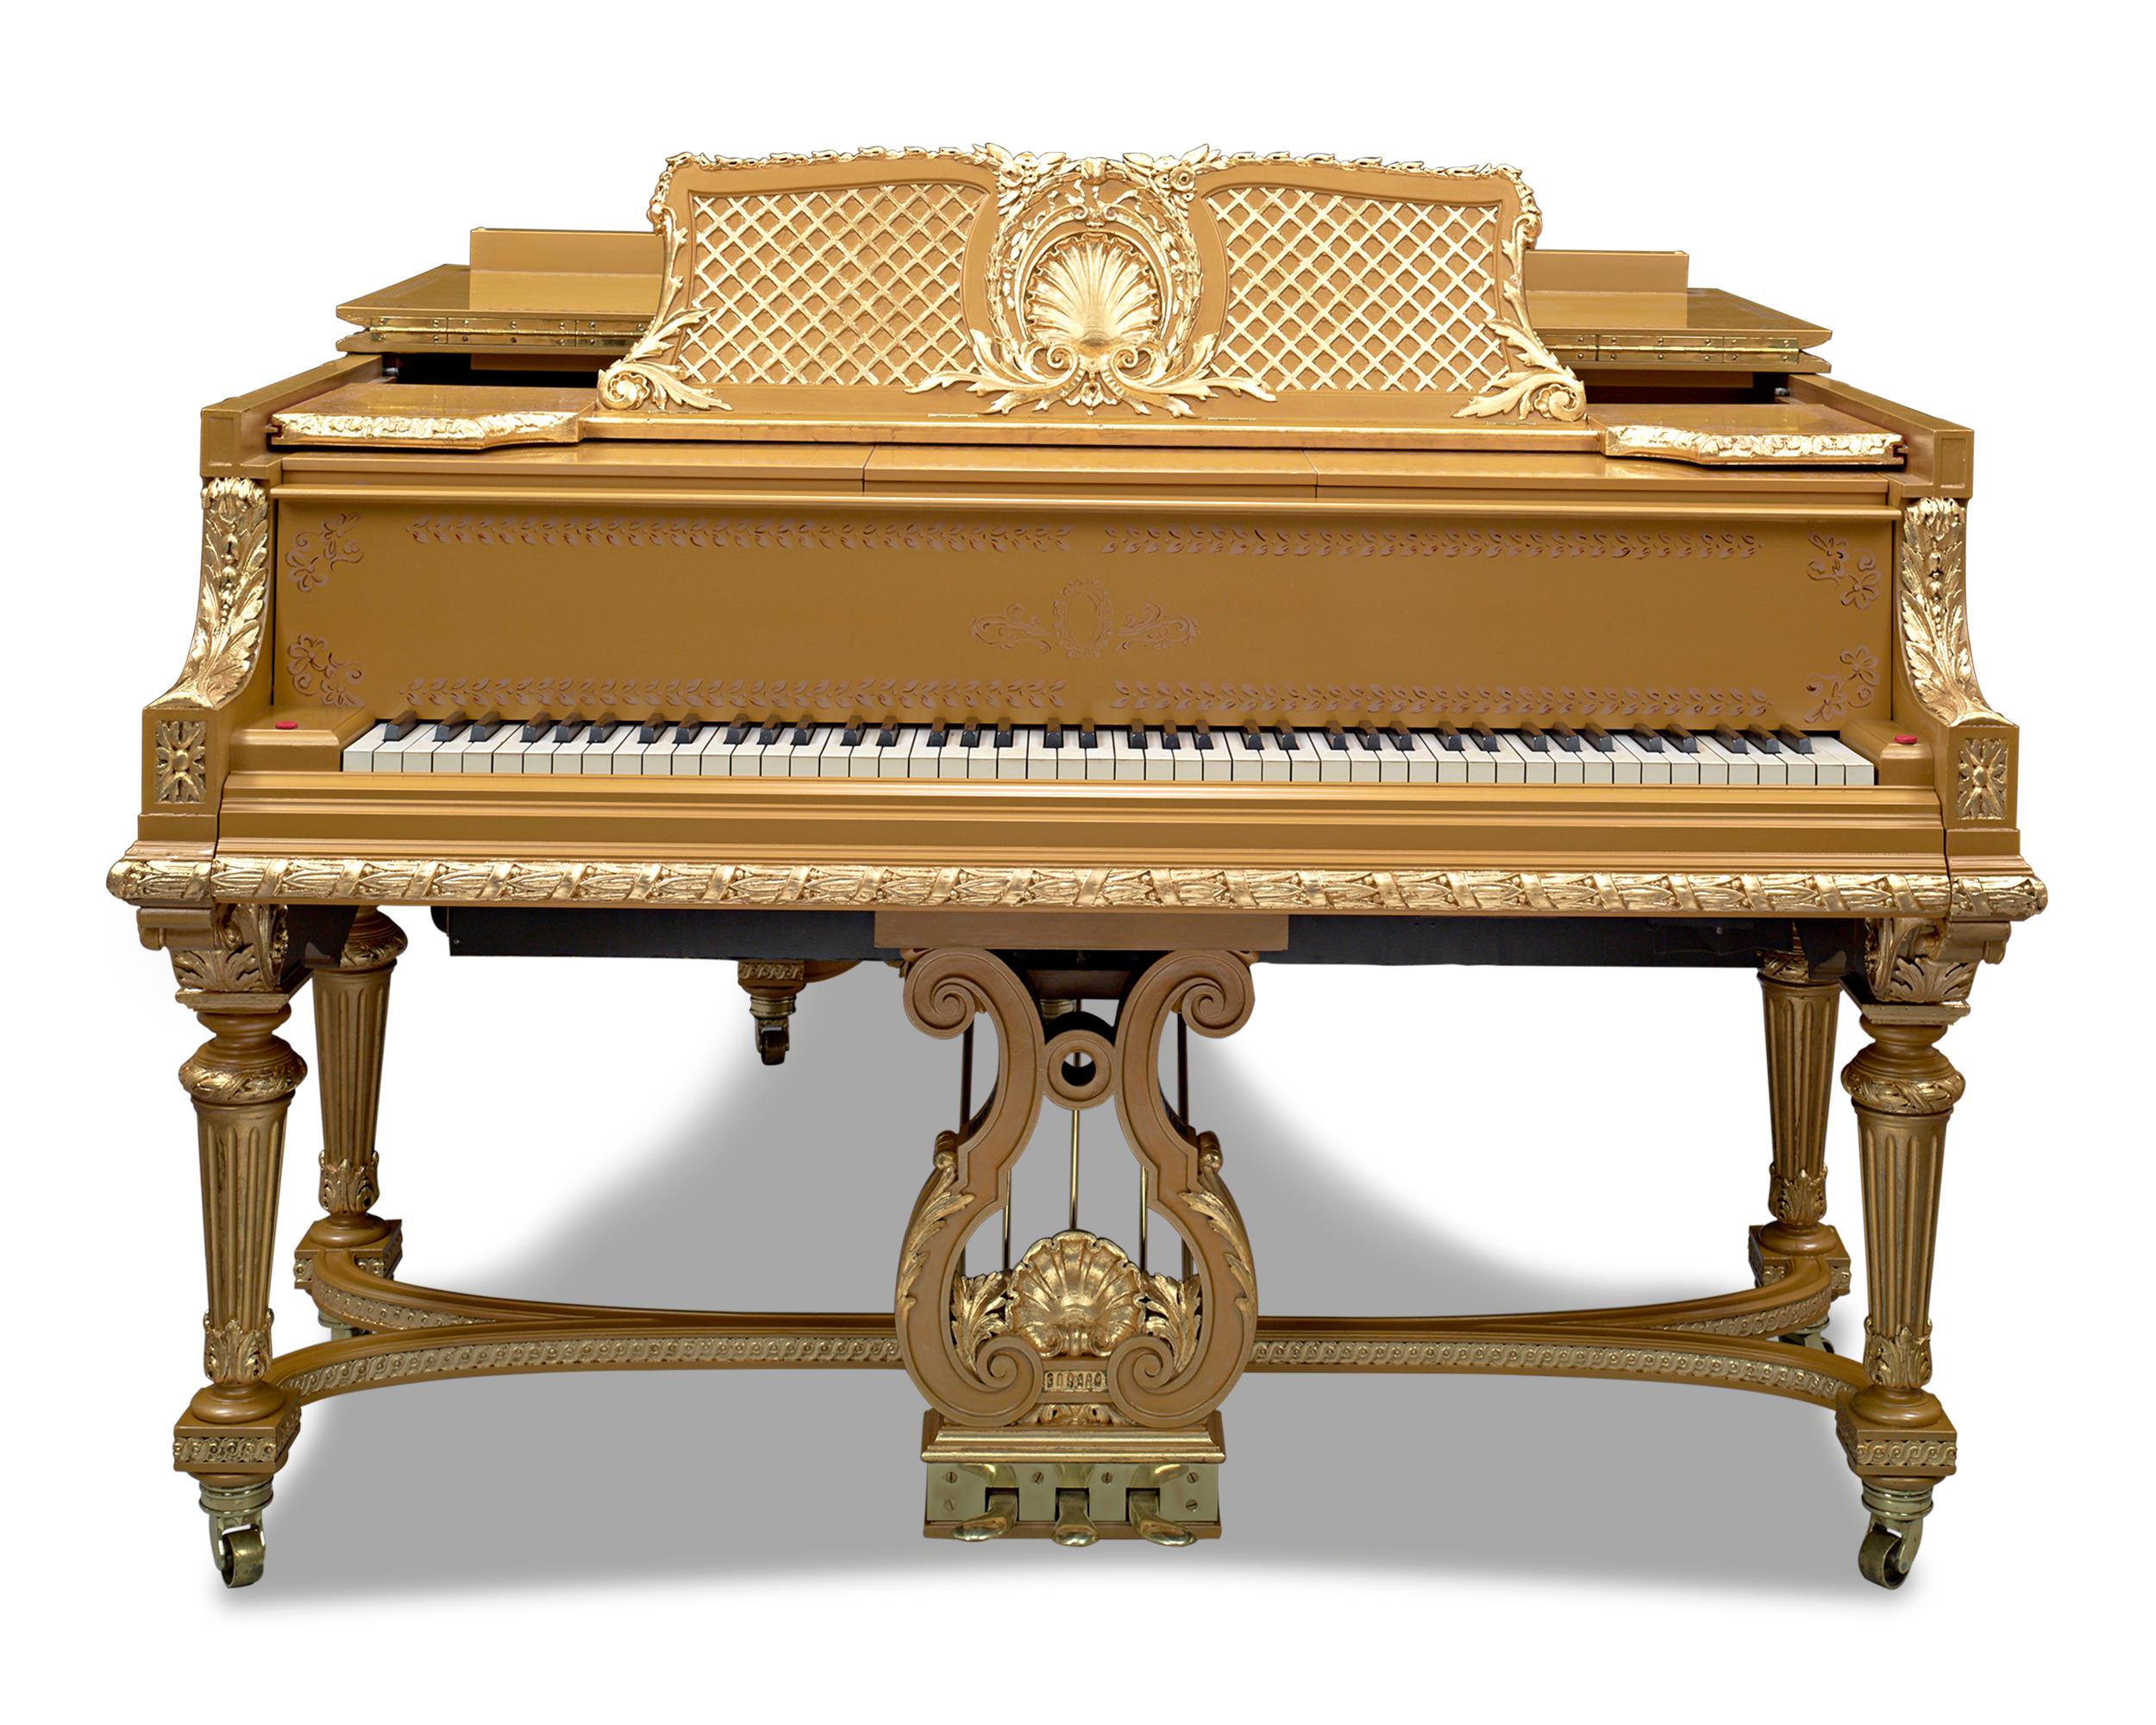 Neoclassical Duo-Art Grand Player Piano by Steinway and Aeolian